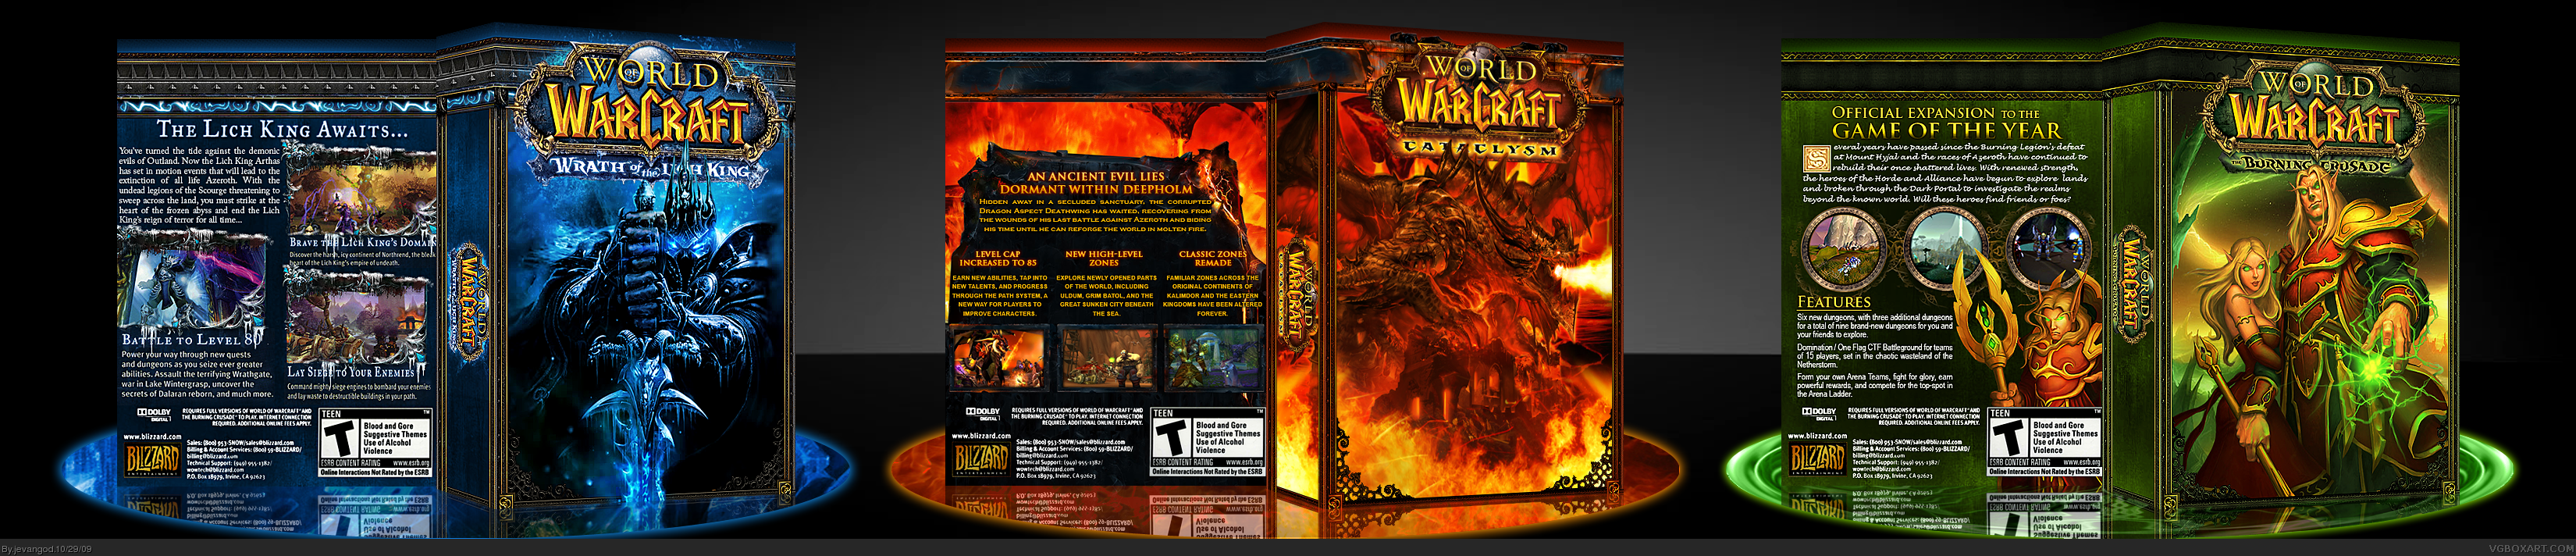 World of Warcraft: Collection box cover